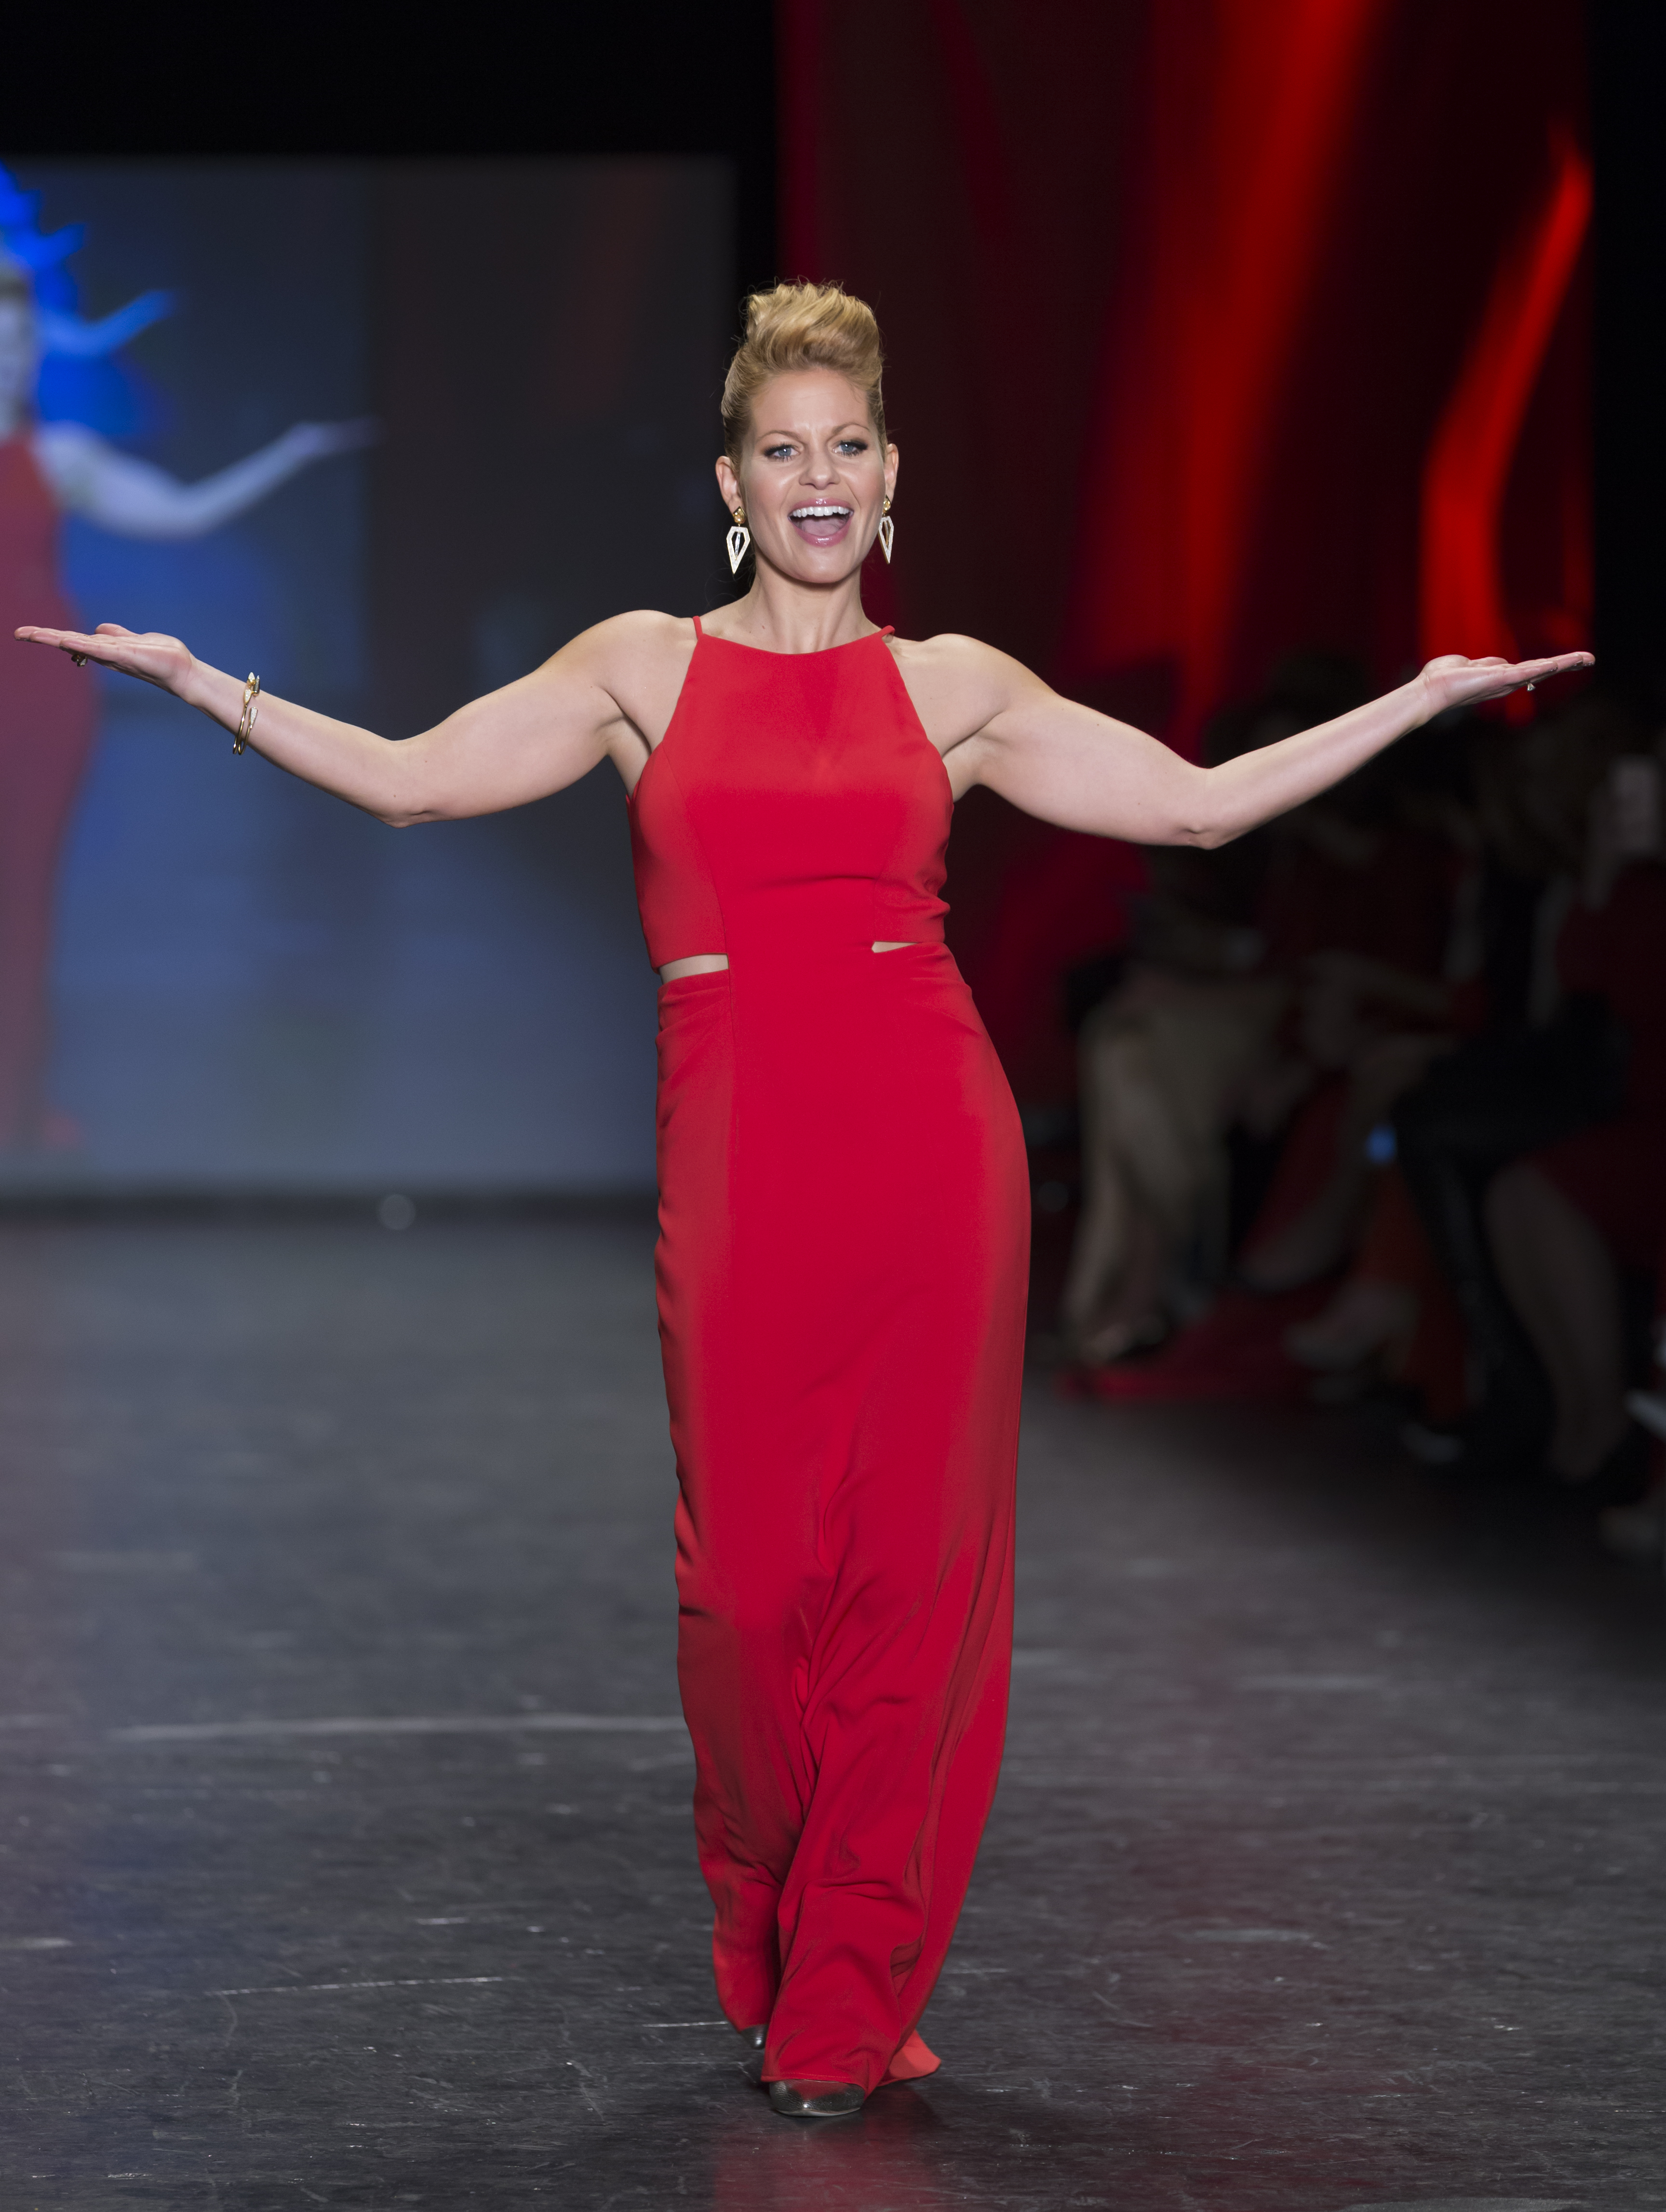 Candace Cameron Bure Defends Sexy Red Gown for Wedding: Photo